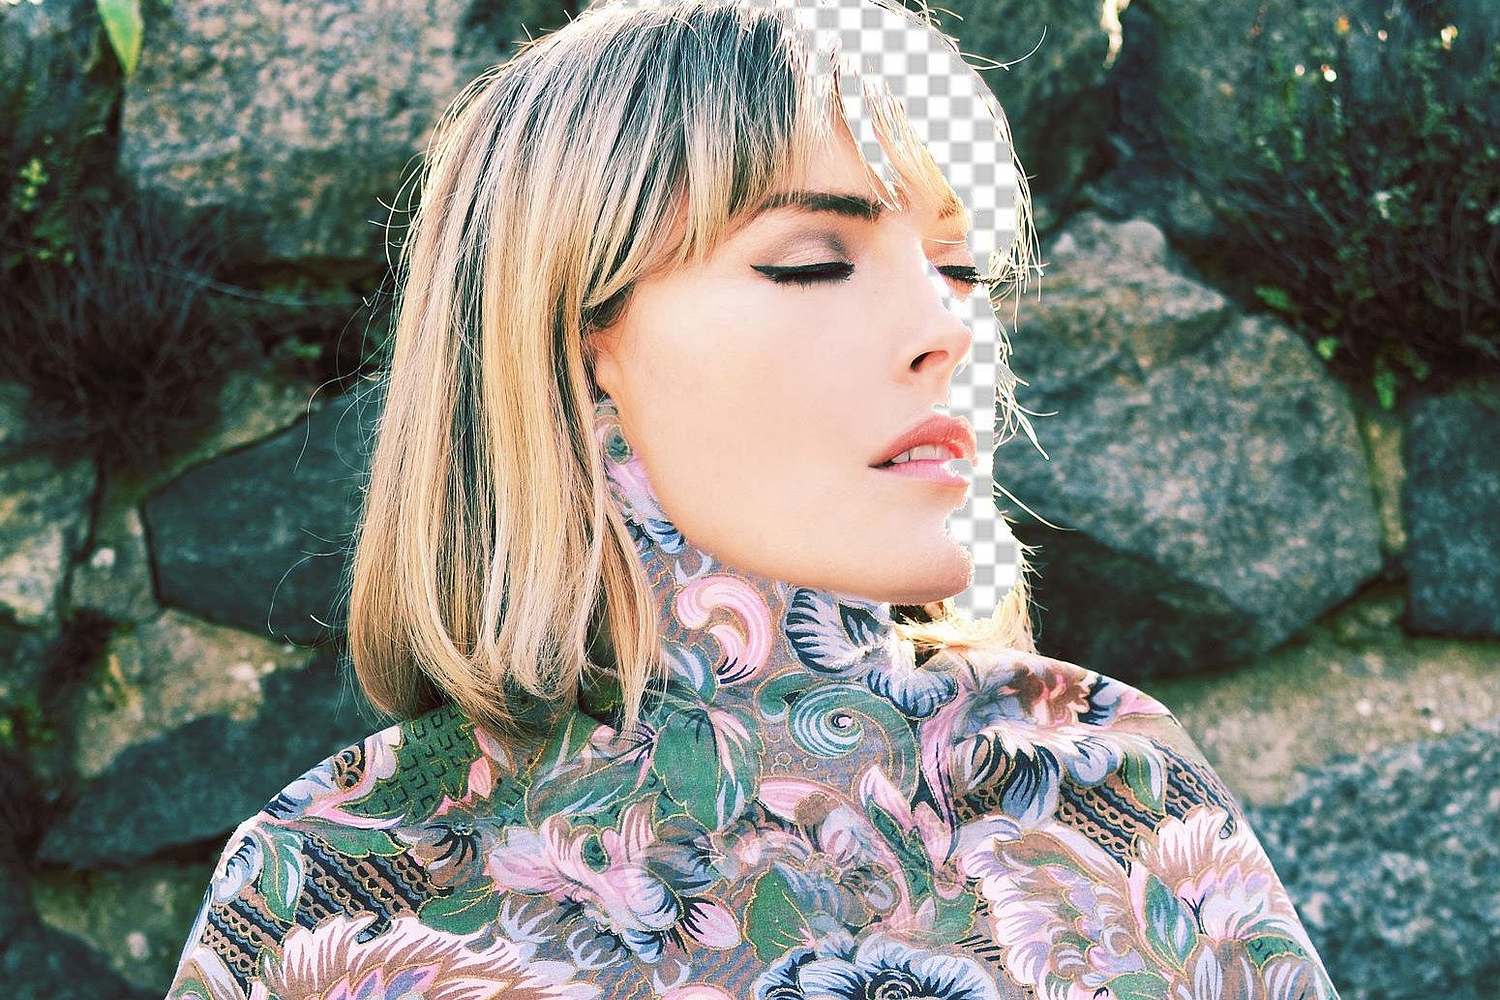 Gwenno channels the druids in her ‘Eus Keus?’ video